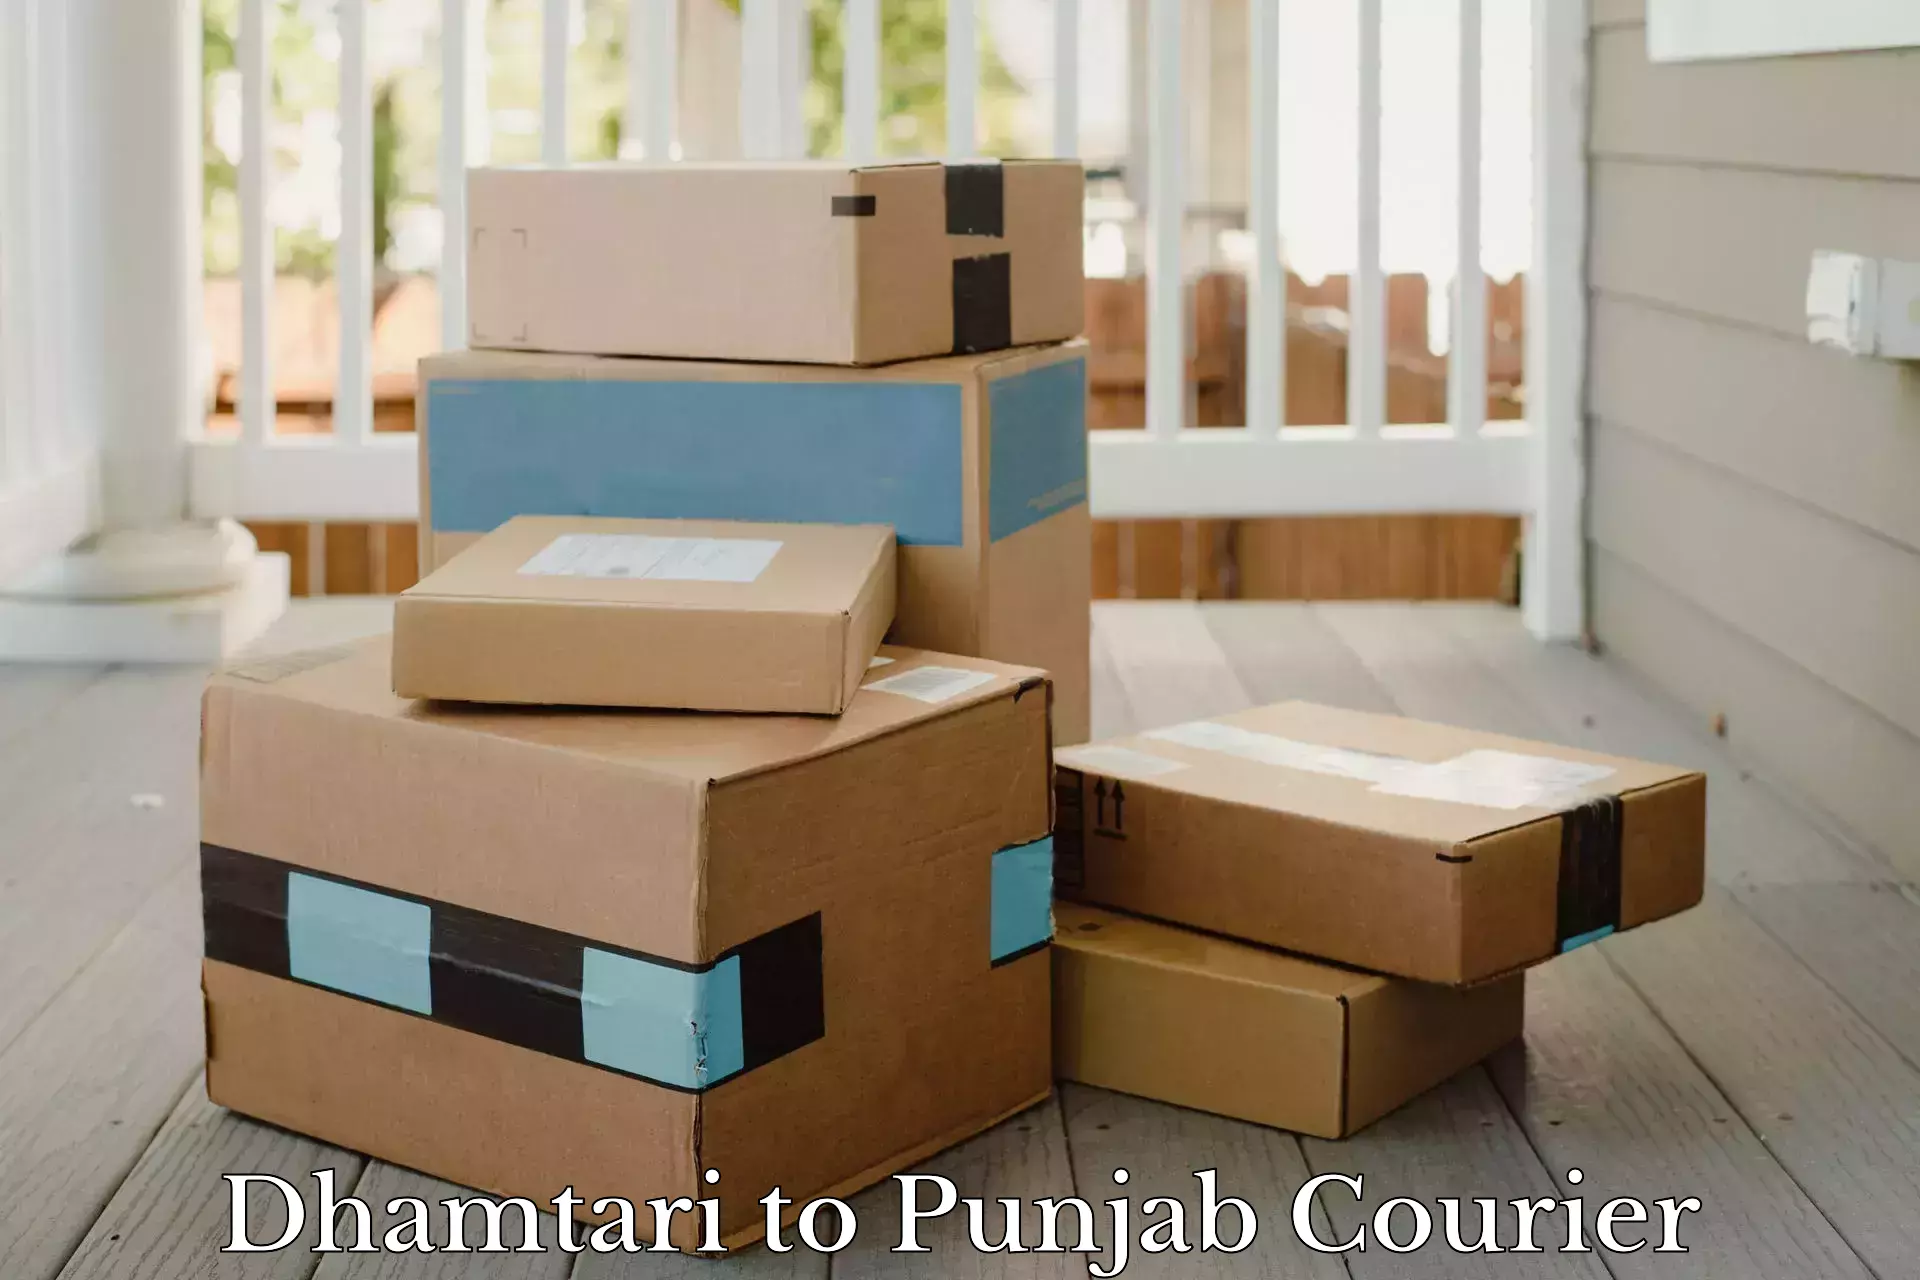 Parcel service for businesses Dhamtari to Phillaur